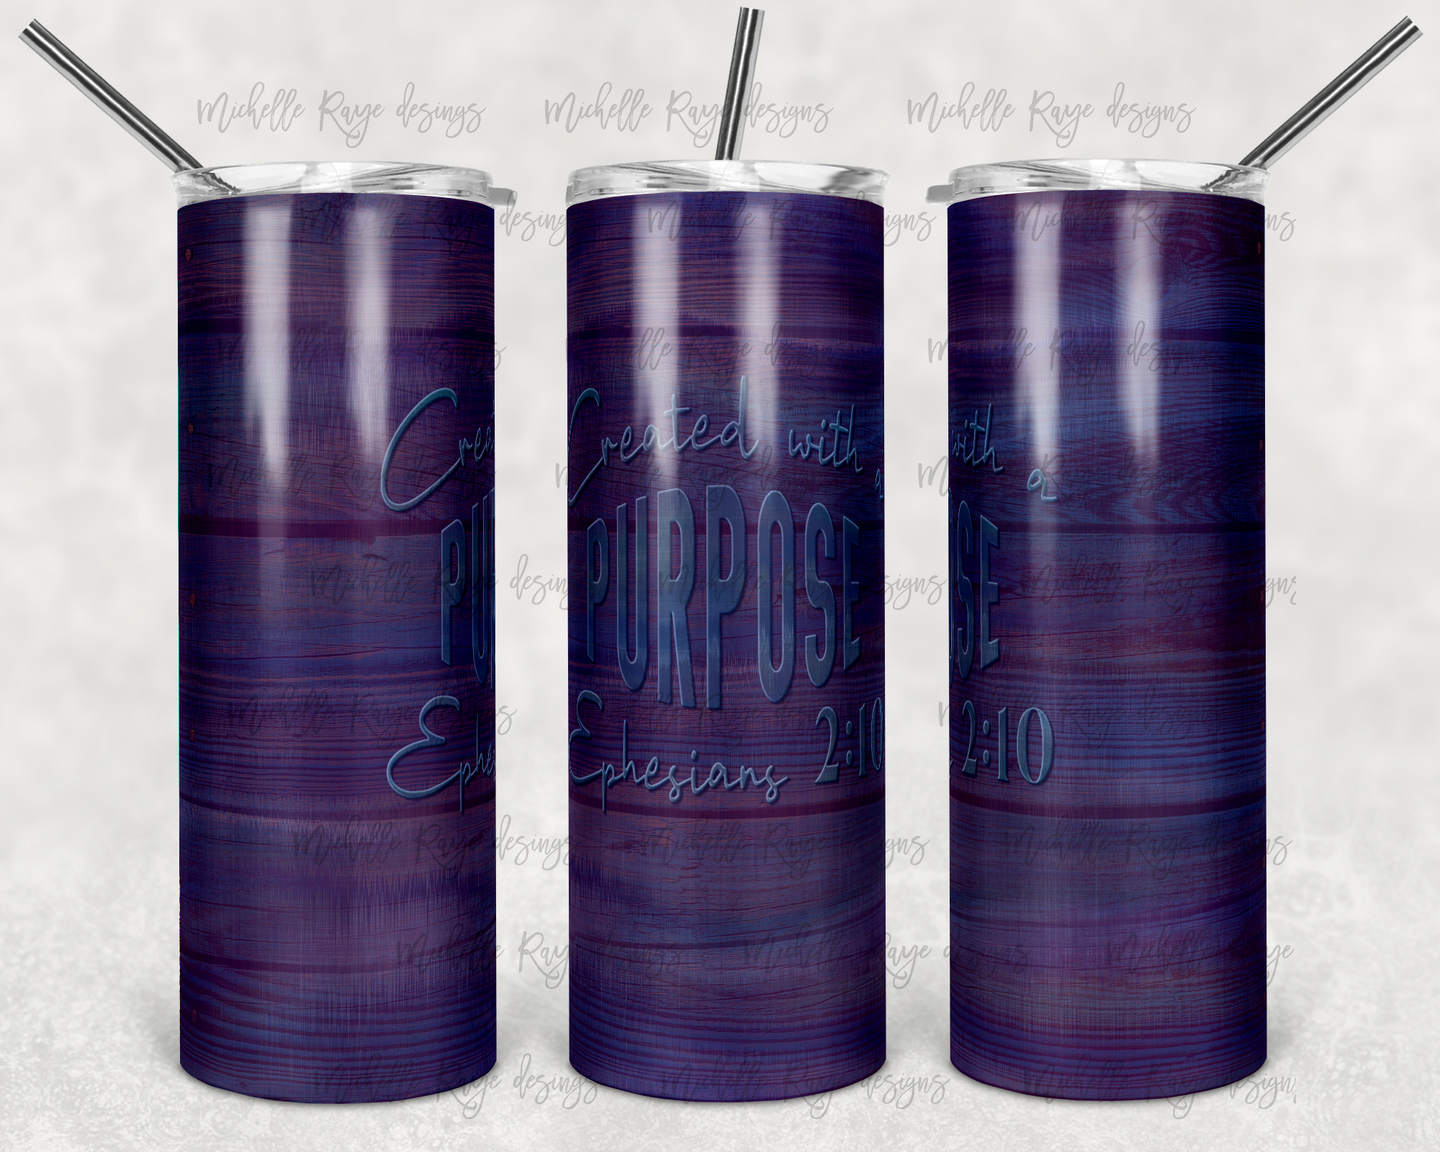 Created with a Purpose on Blue and Purple Wood Grain